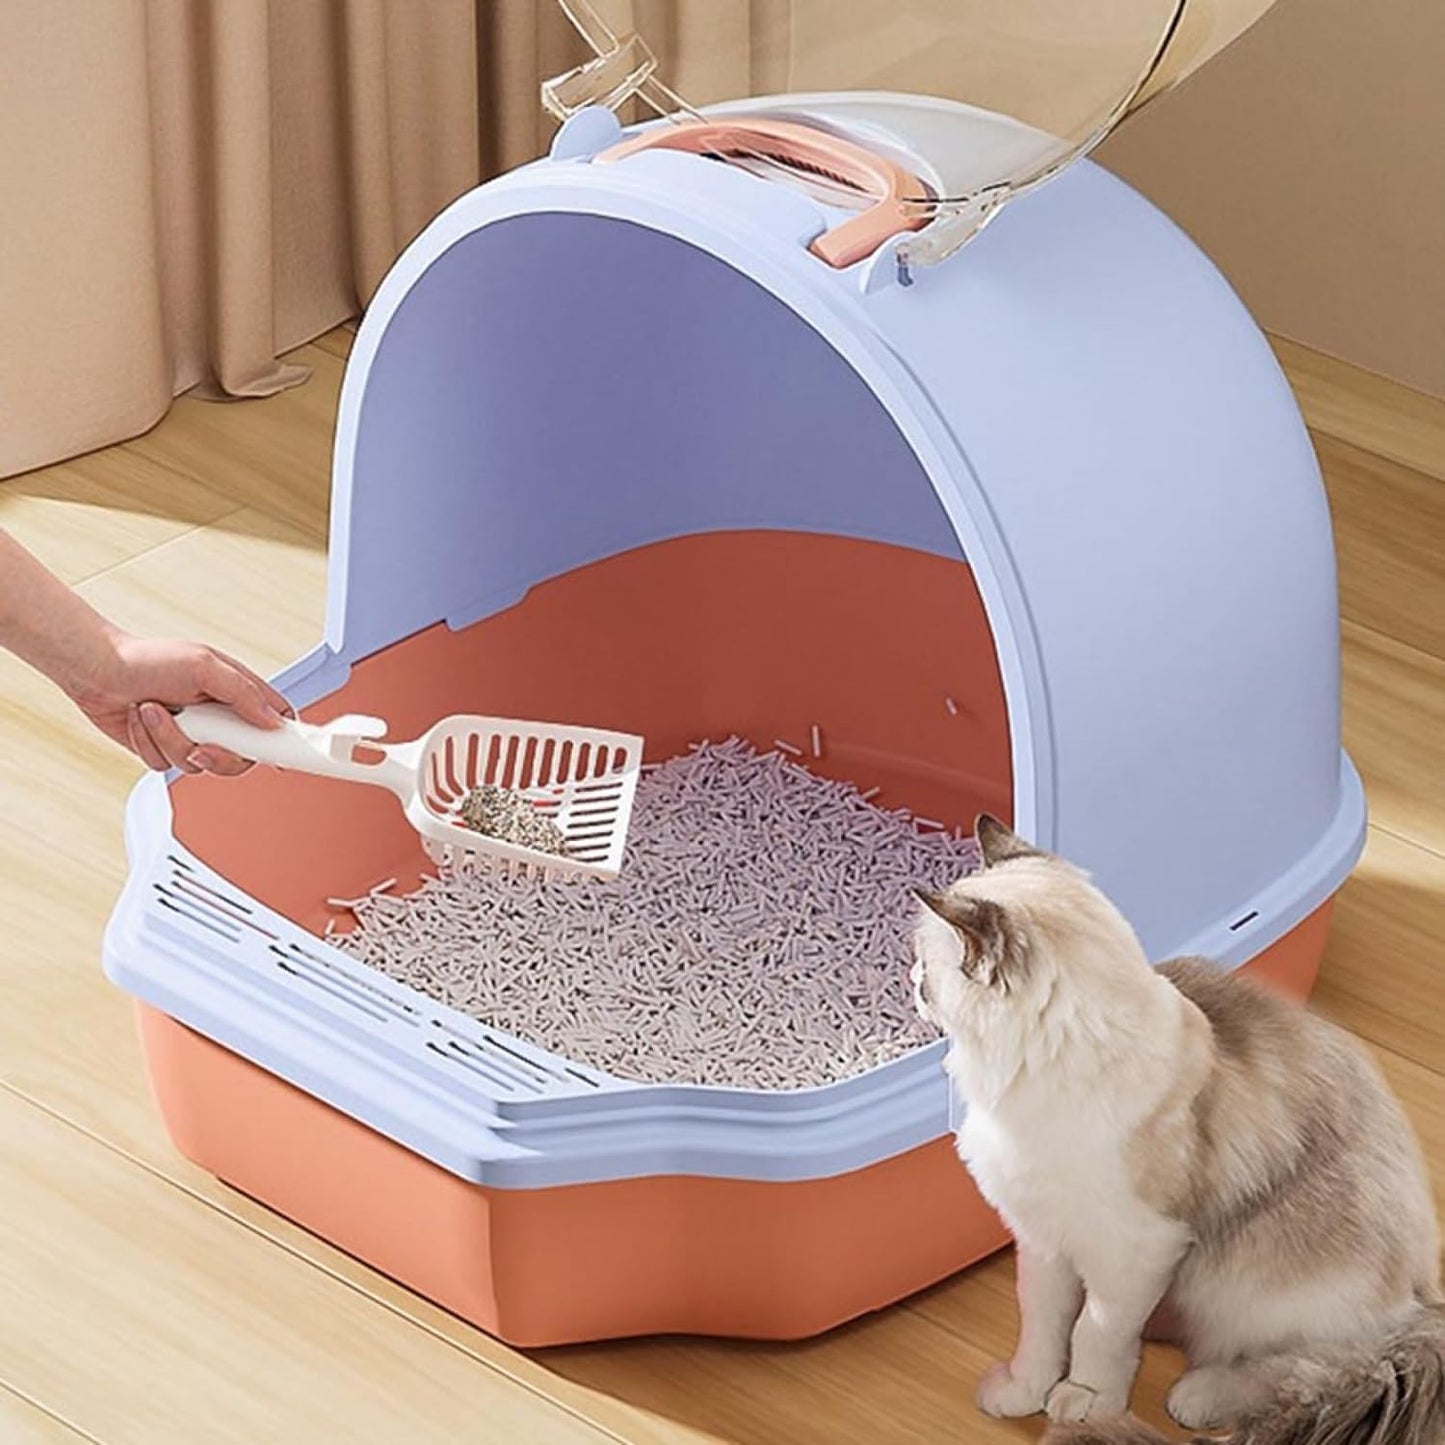  HOCC Cat Sandbox, Dome-shaped, Clear, Large, Wide, Cute, Includes Scoop, Stylish, Sand Splattering, Antibacterial, Odor-Resistant, Clean, Spacious, Easy to Clean, Popular, Compact, Washable, Pink, 19.7 x 16.5 x 15.7 inches (50 x 42 x 40 cm) - Buy HOCC Ca